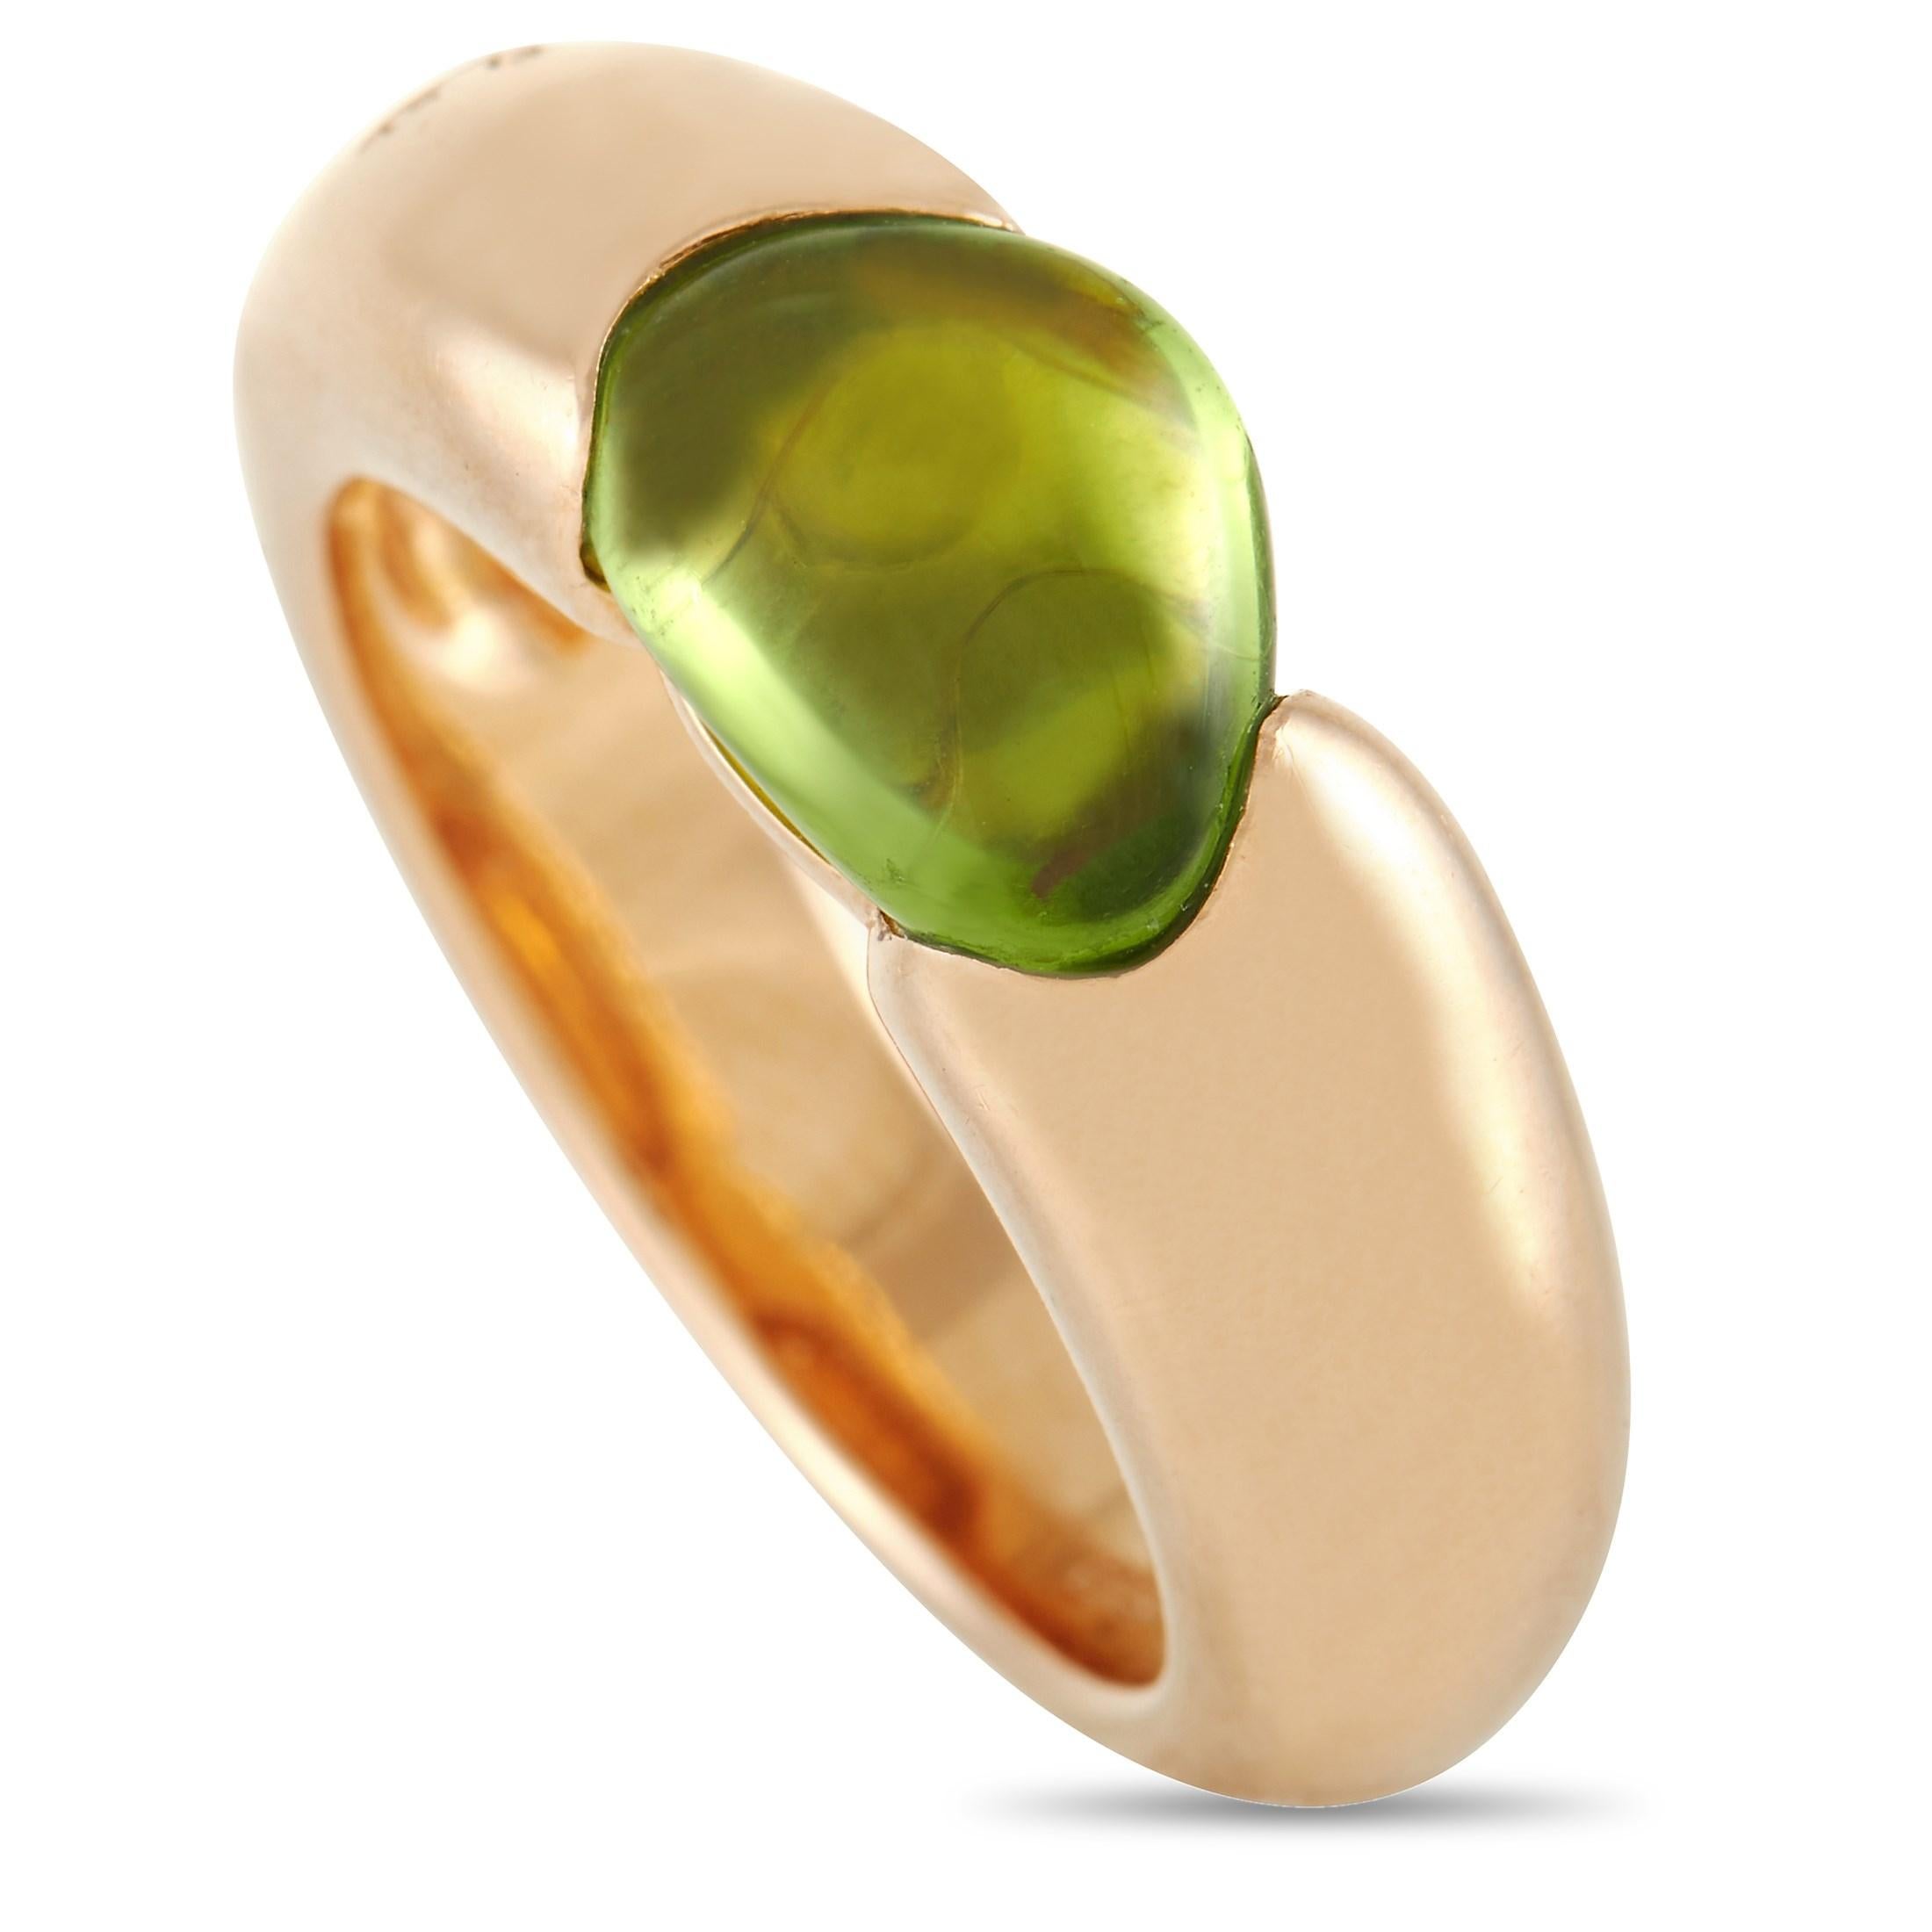 An exciting combination of 18K Rose Gold and green peridot make this ring from Pomelatto Sassi unlike anything you have seen before. Breathtaking in its simplicity, it features a 6mm wide band and a 4mm top height. 

This jewelry piece is offered in